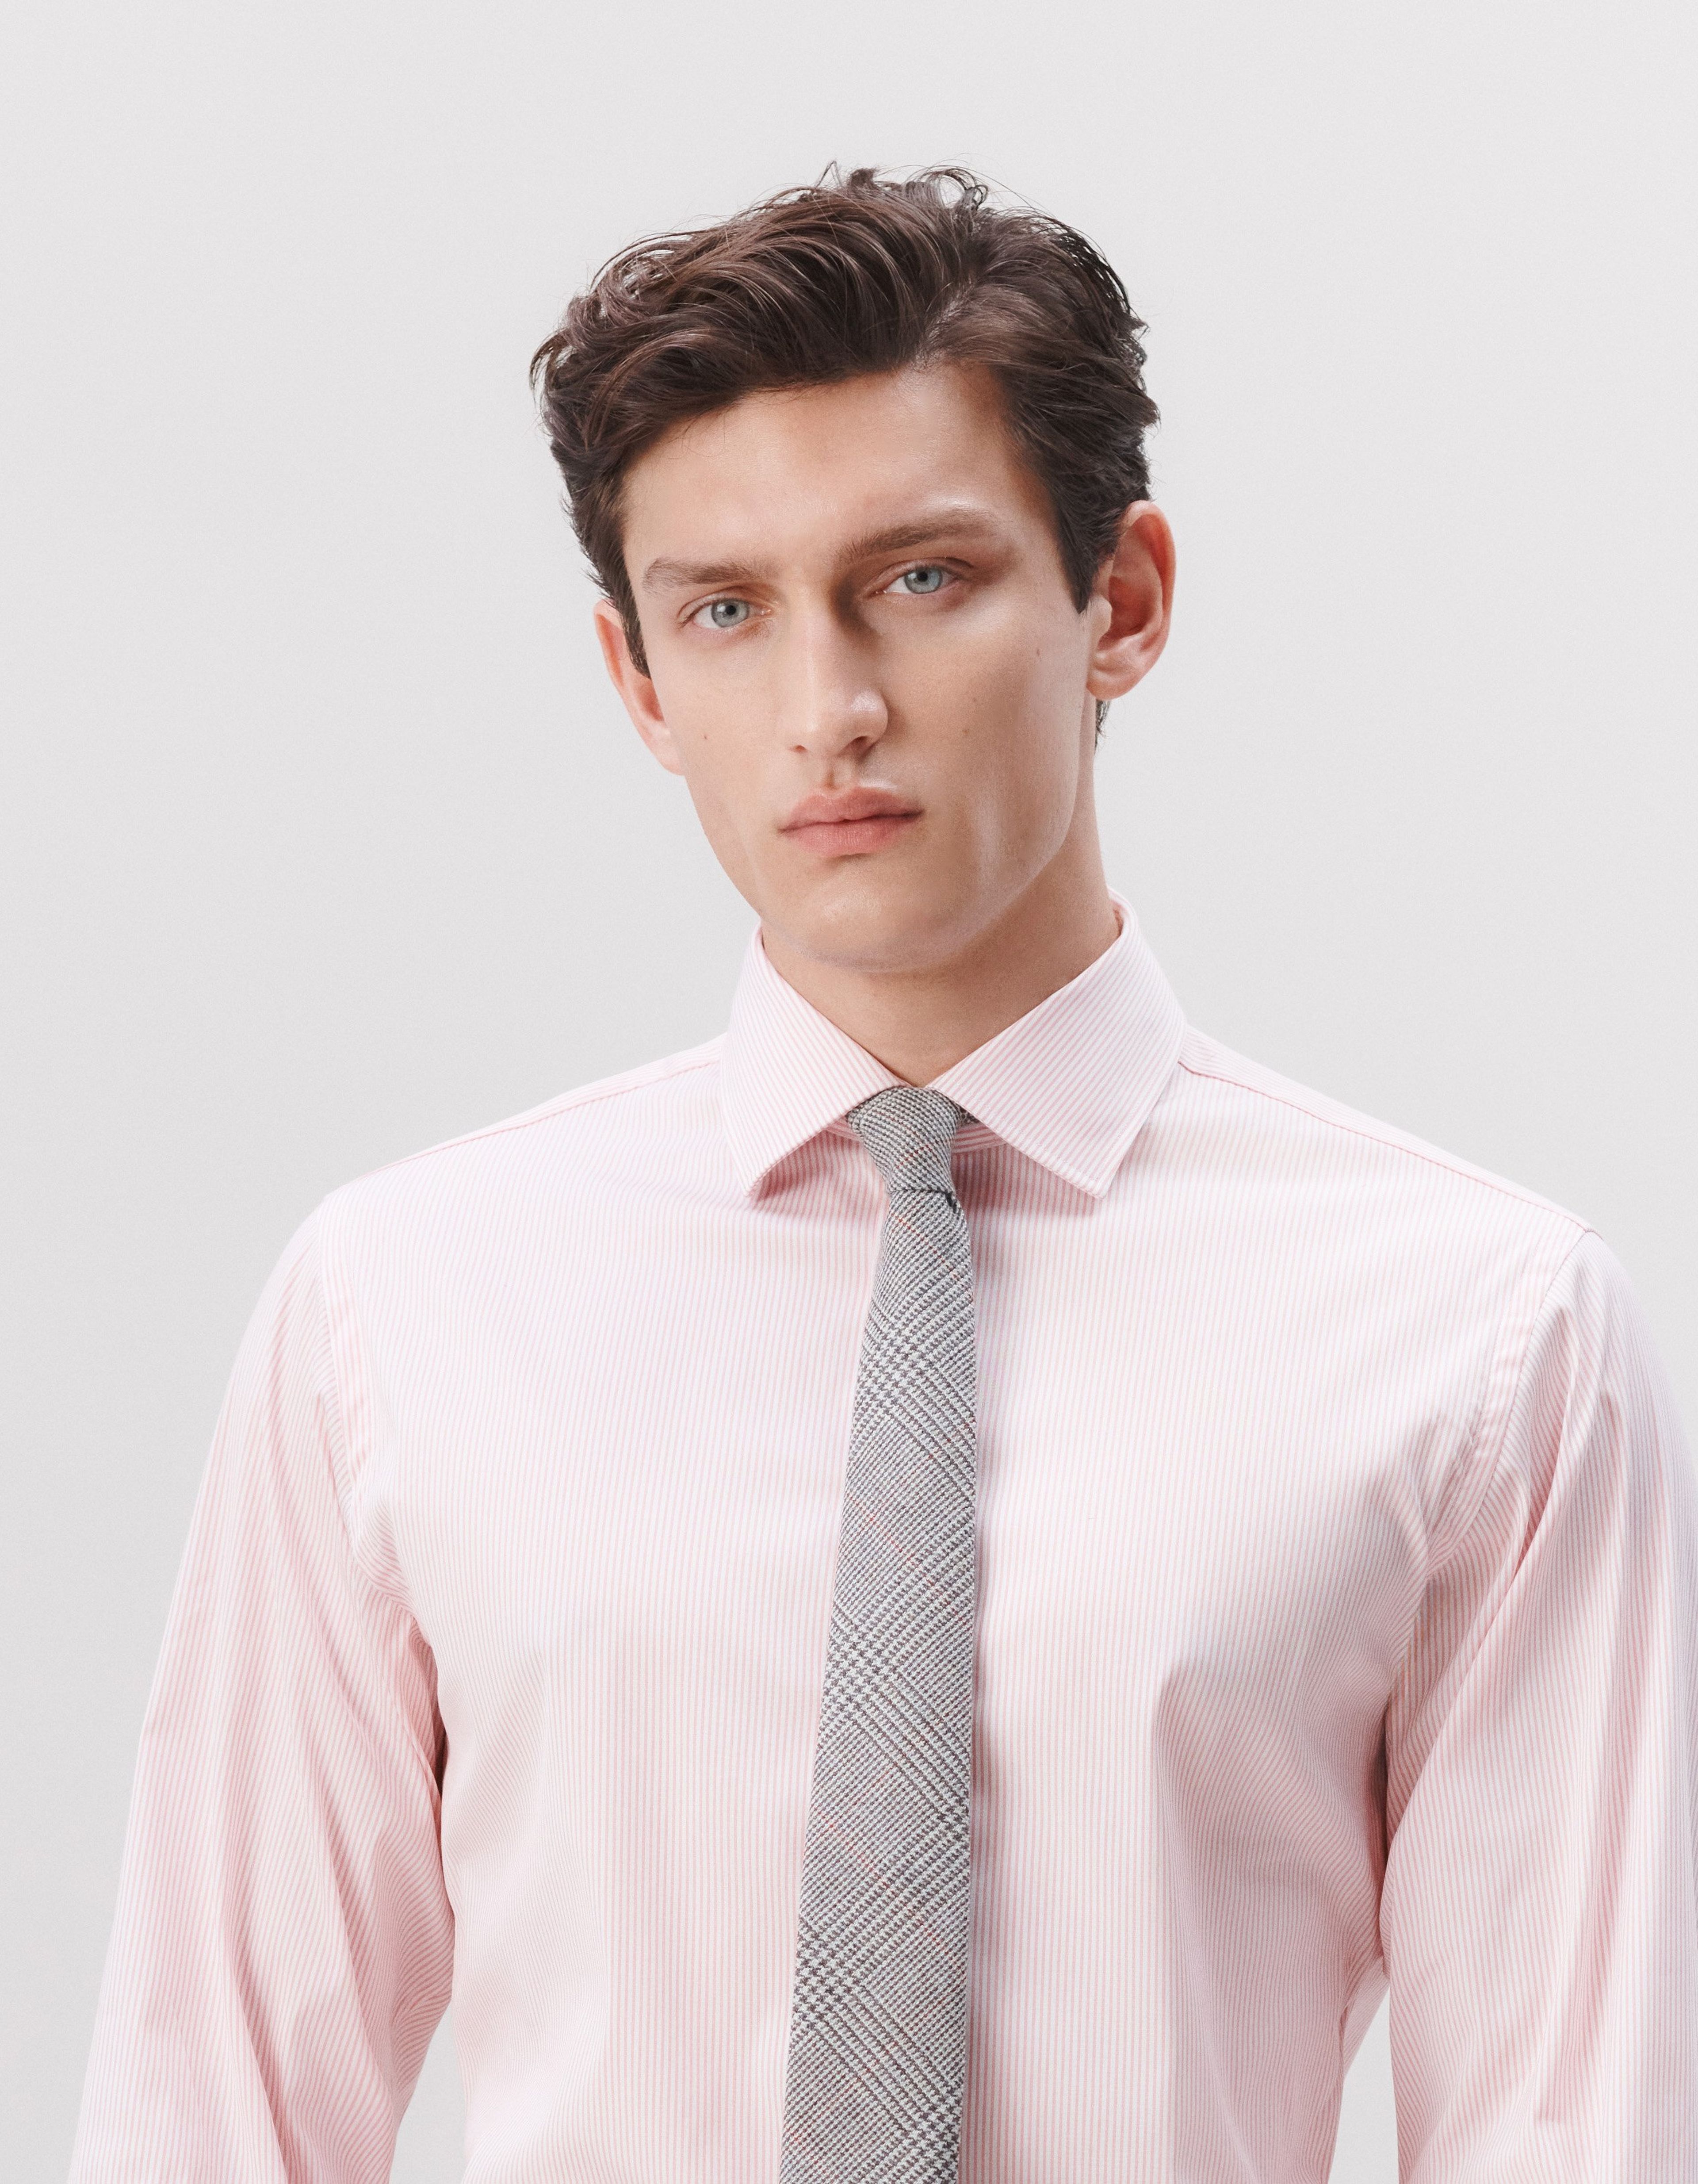 A man wearing a pink striped shirt with a grey tie